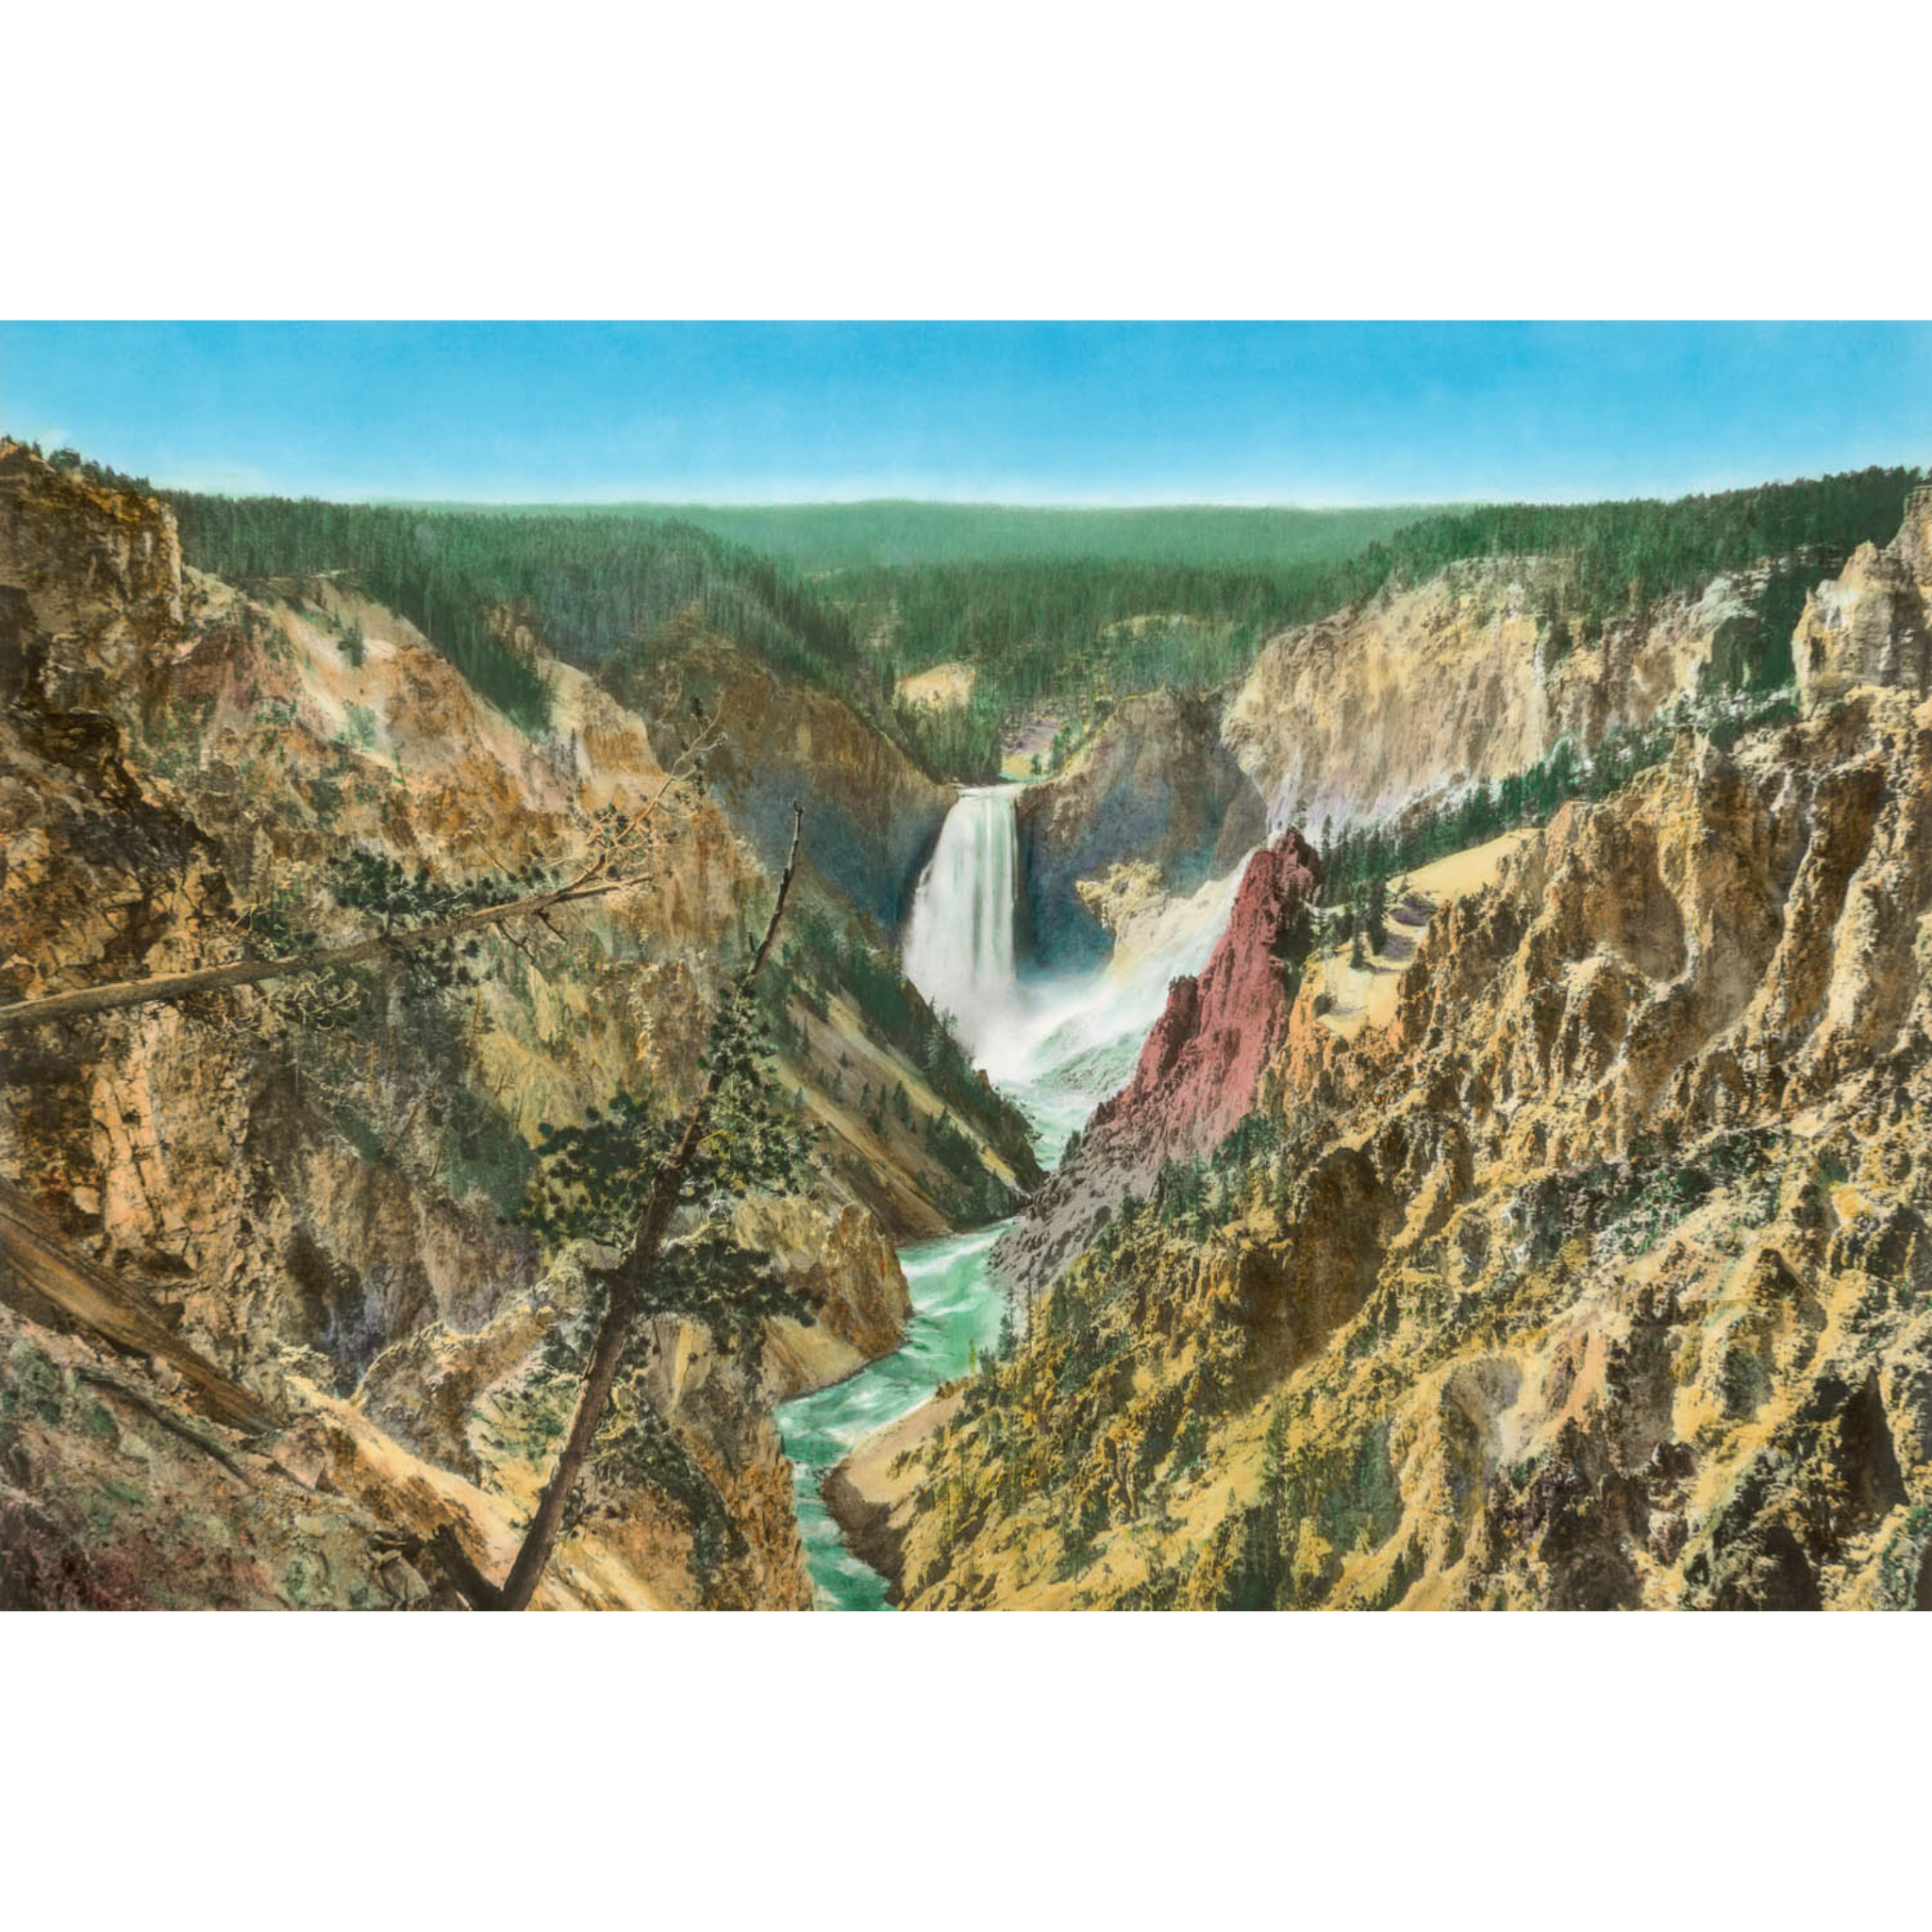 Grand Canyon of the Yellowstone - 1928 Hand Colored Silver Print